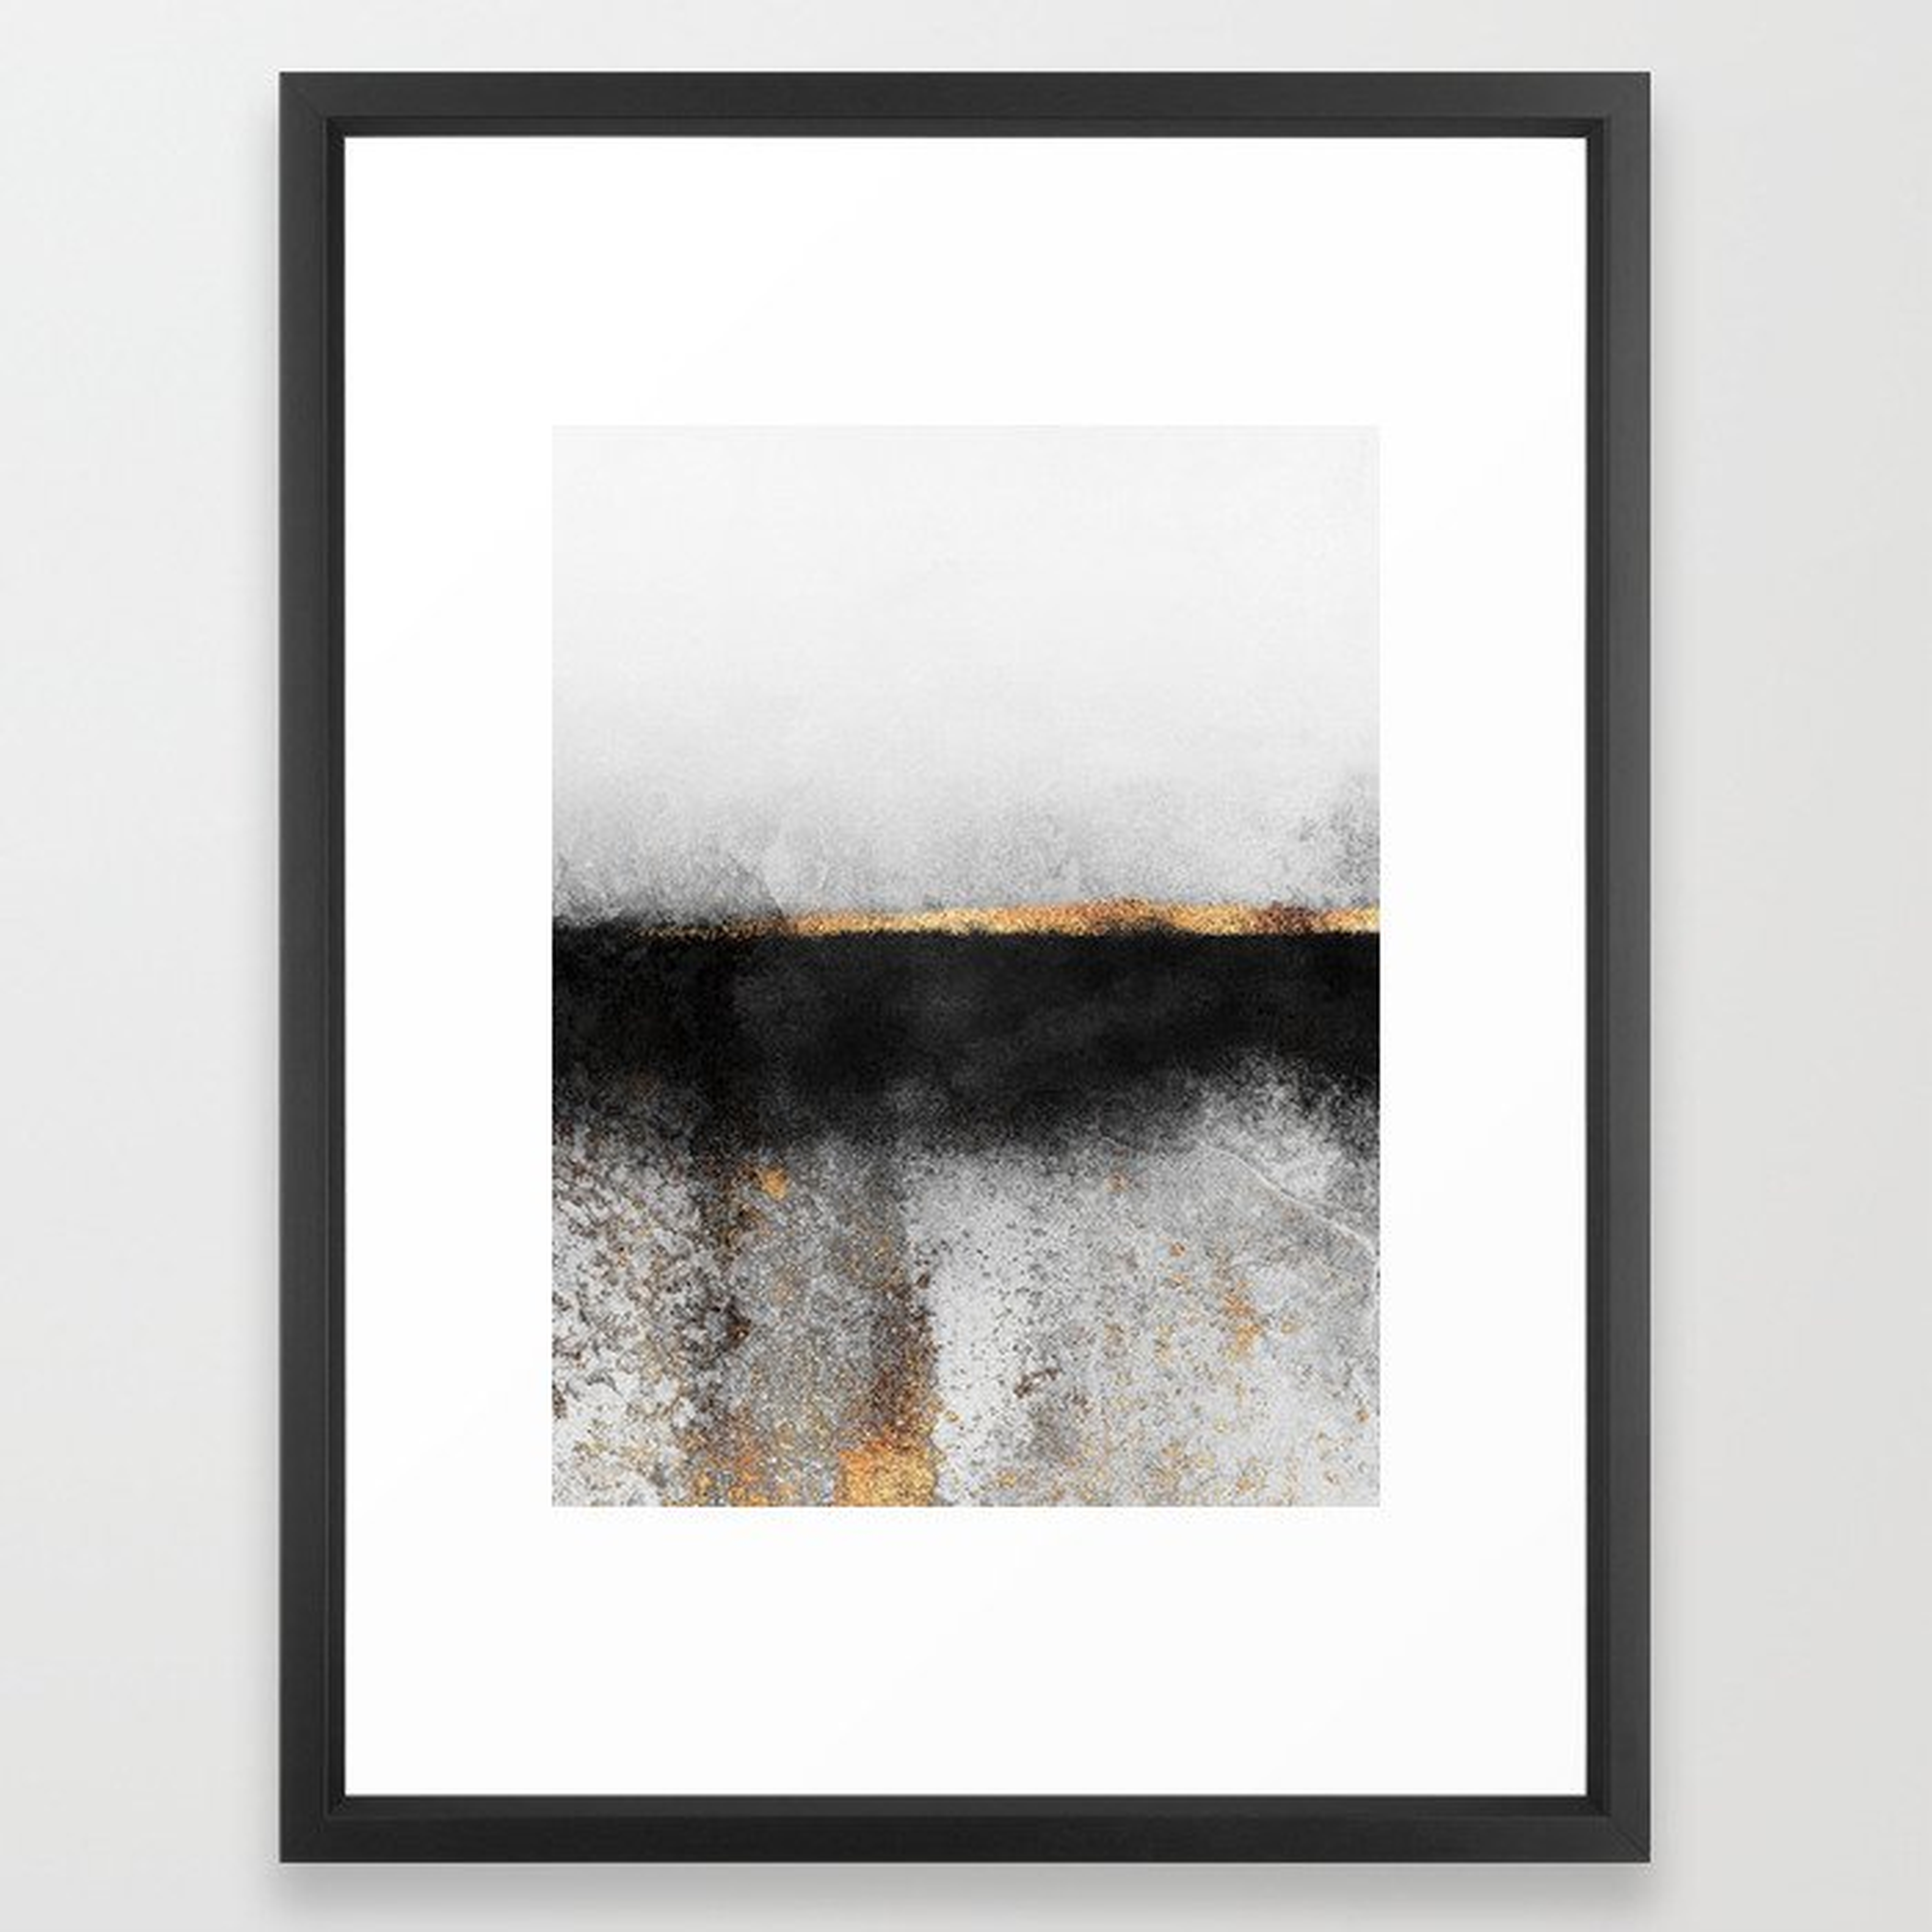 Soot and Gold Framed, 20" x 26", Black Frame - Society6